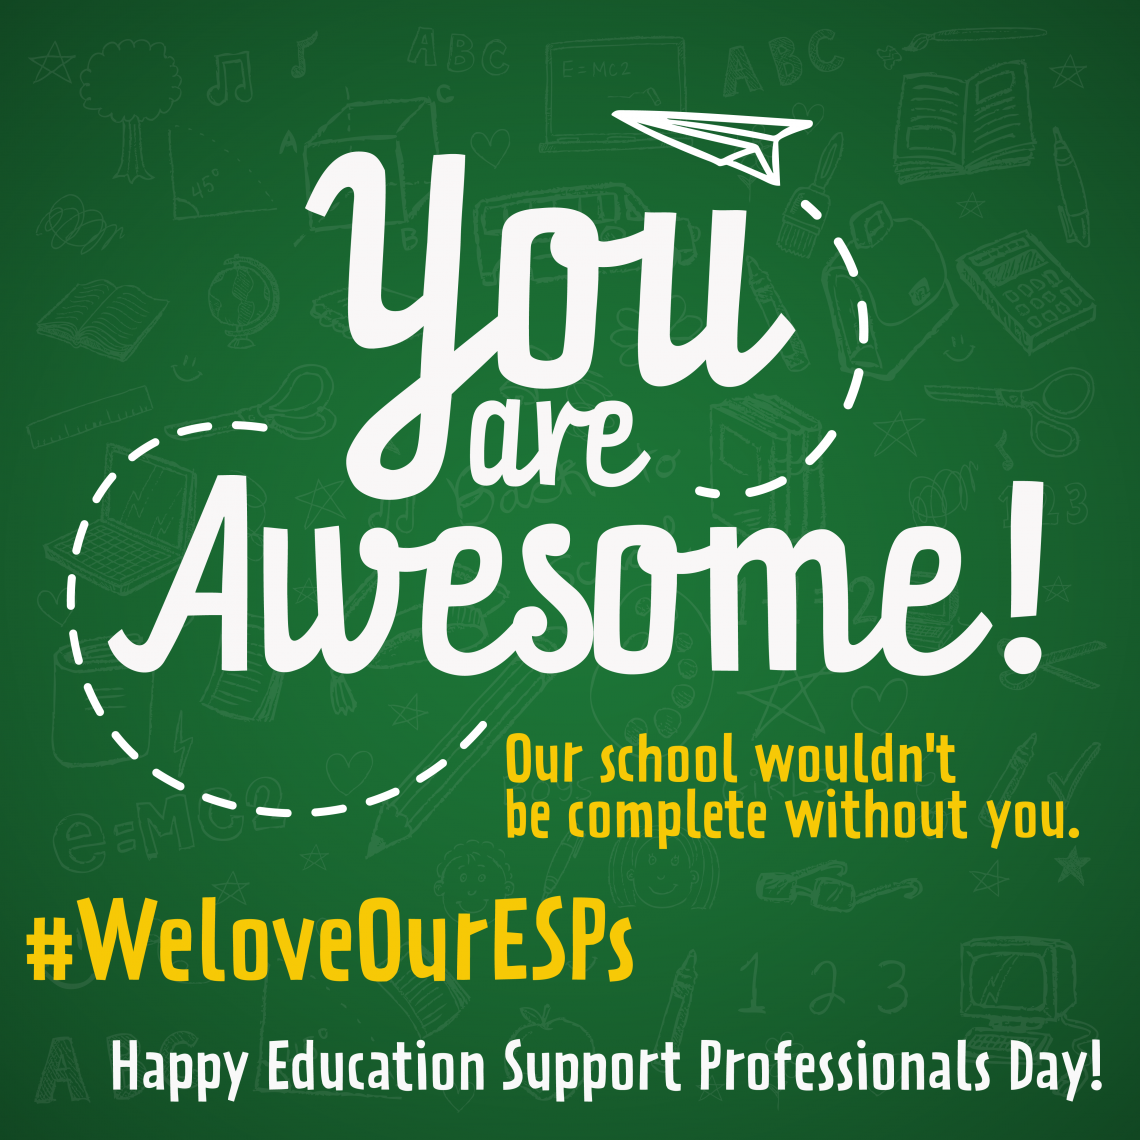 American Education Week — Today is Education Support Professionals Day